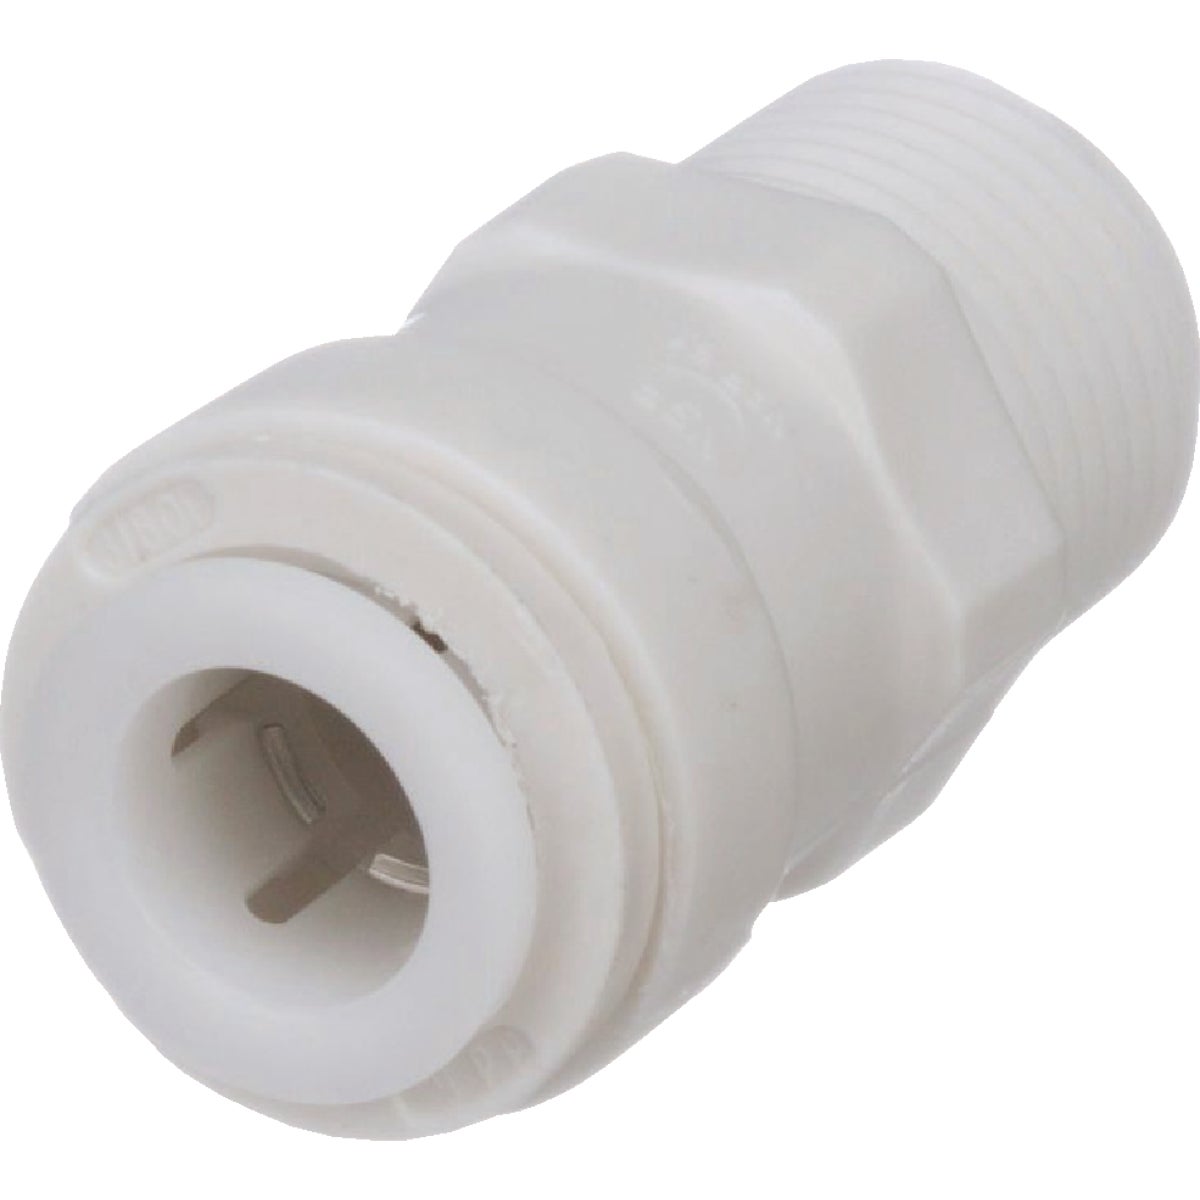 Watts Aqualock 3/8 In. OD x 1/2 In. MPT Push-to-Connect Plastic Adapter